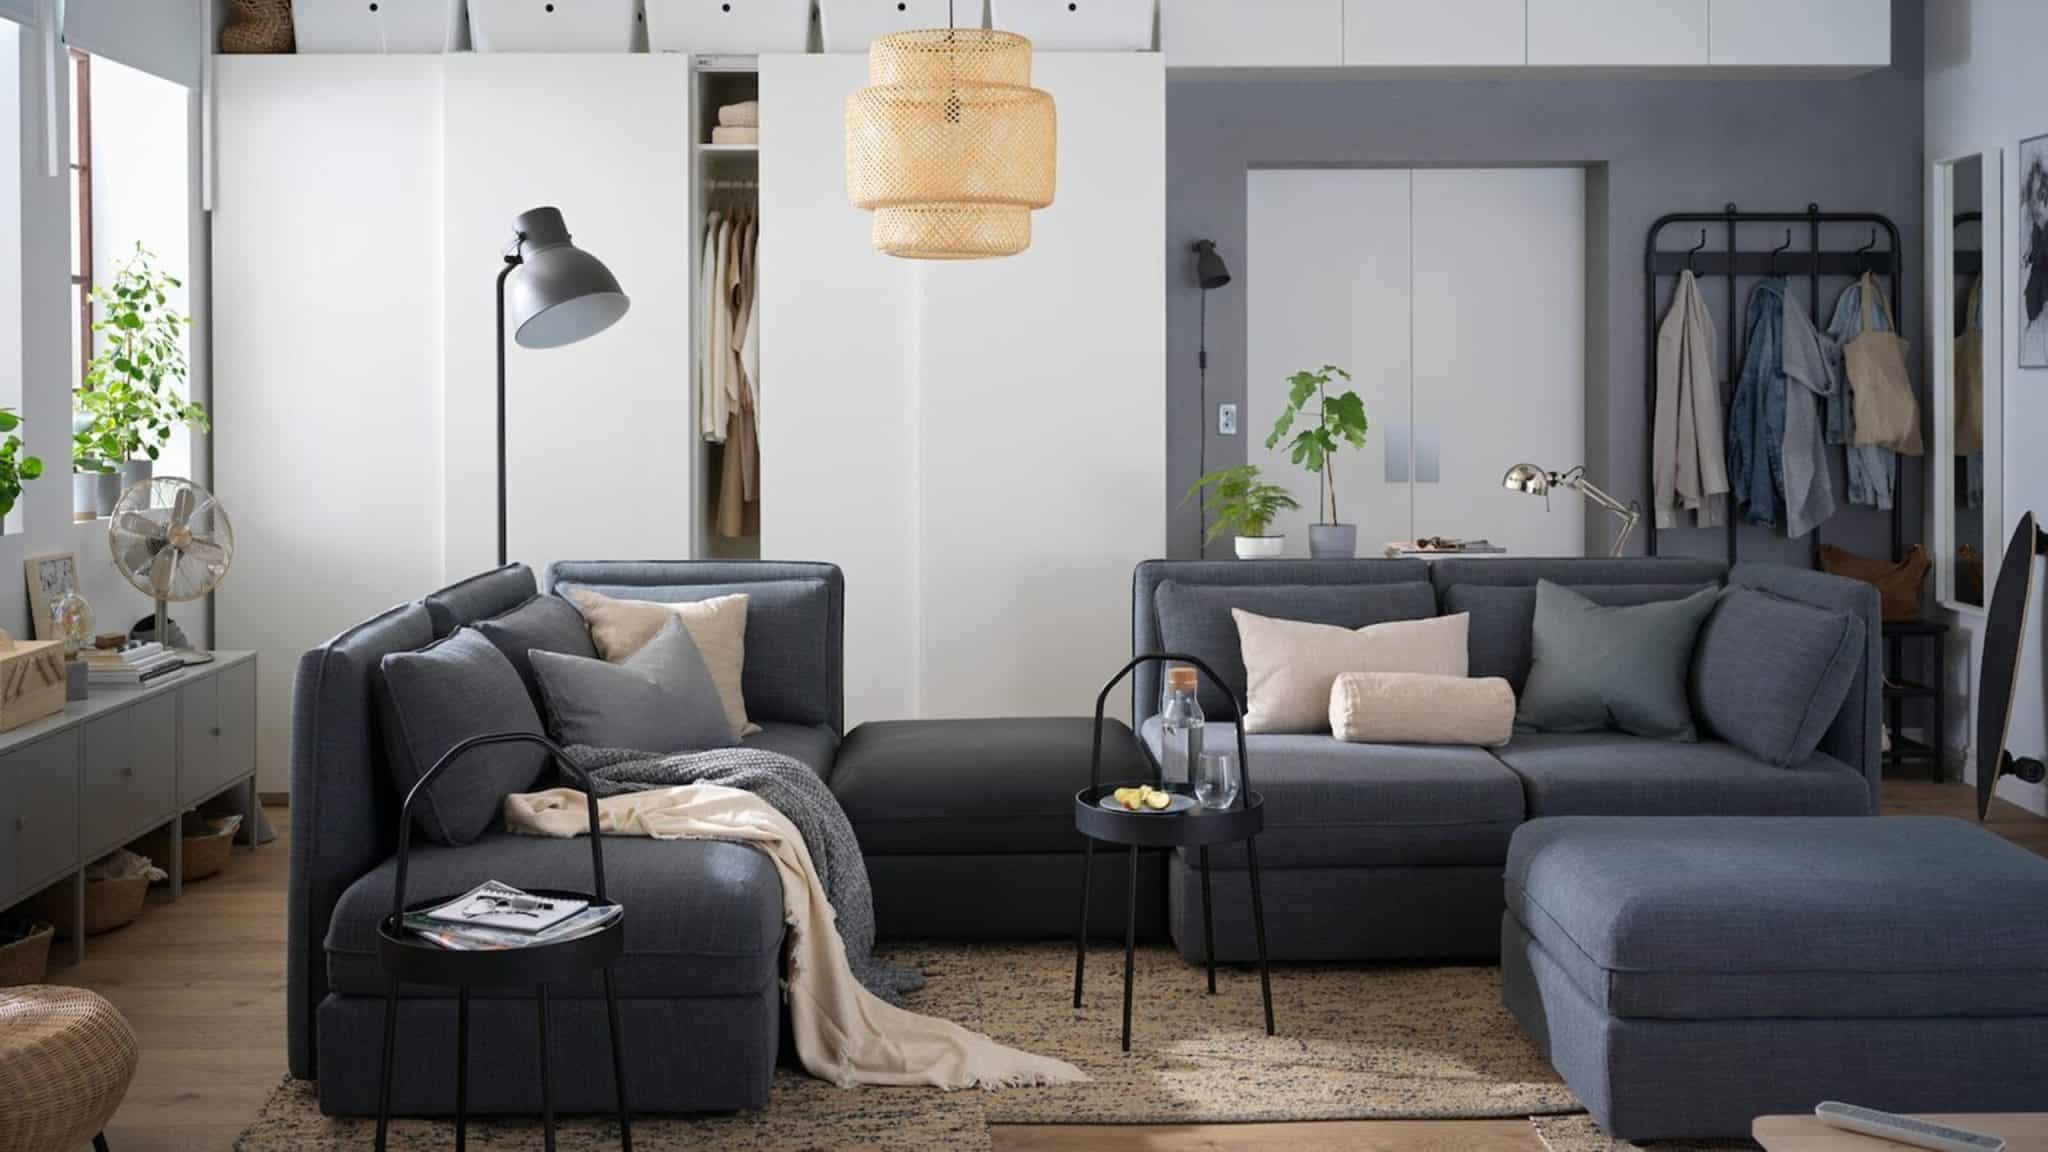 15 Light Gray Sofas: A Stylish Look for All Budgets